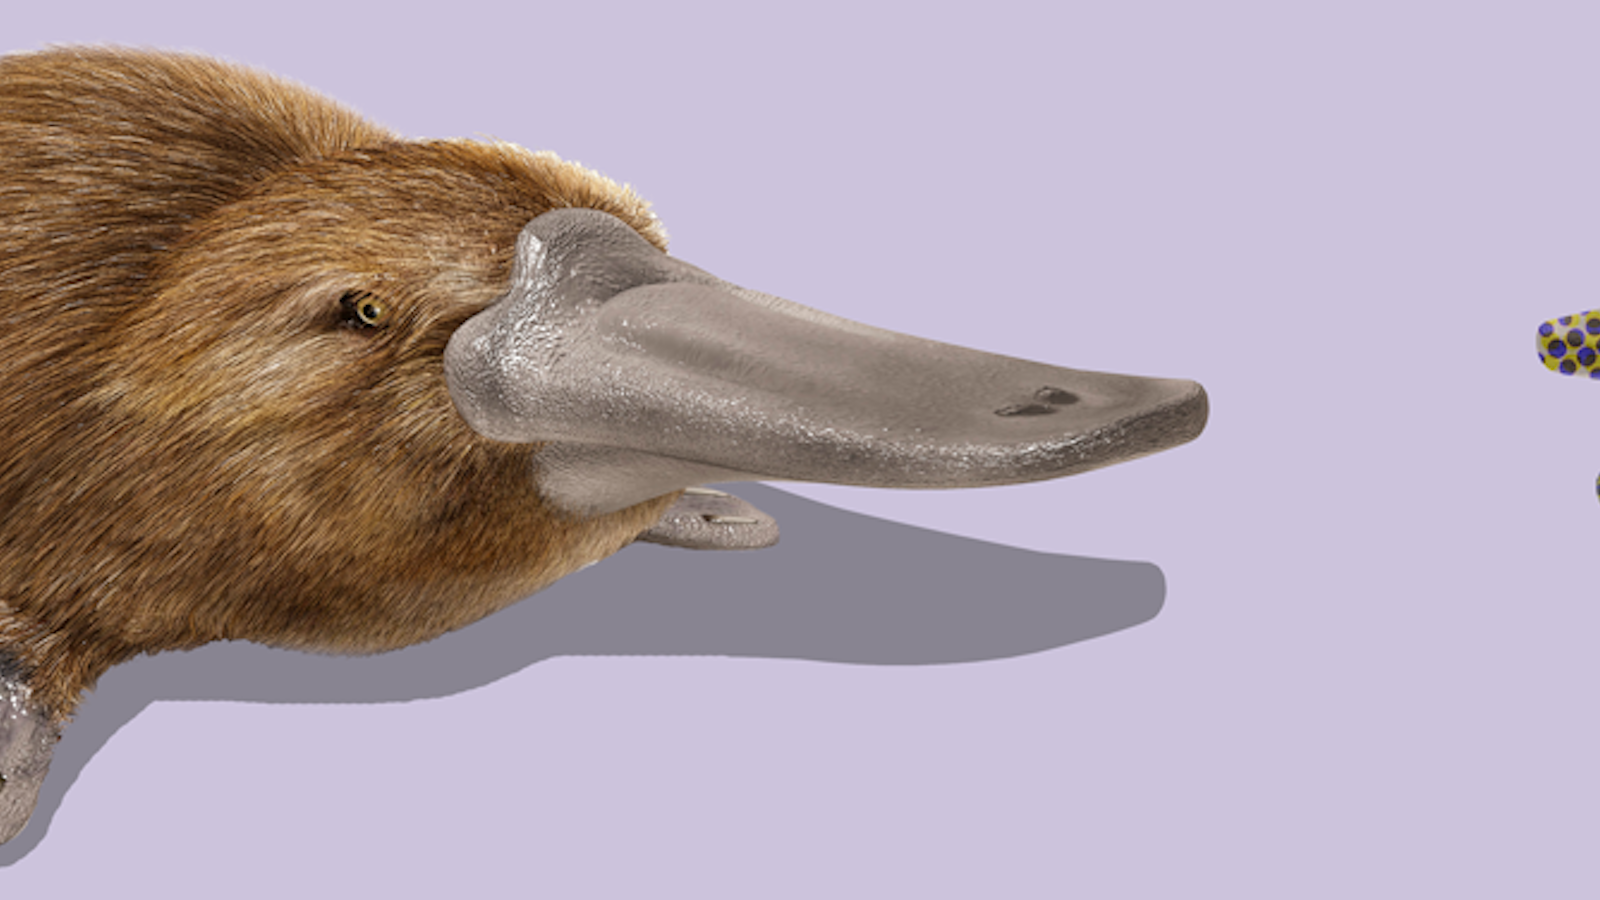 Why Hasn't Evolution Made Another Platypus? - Nautilus